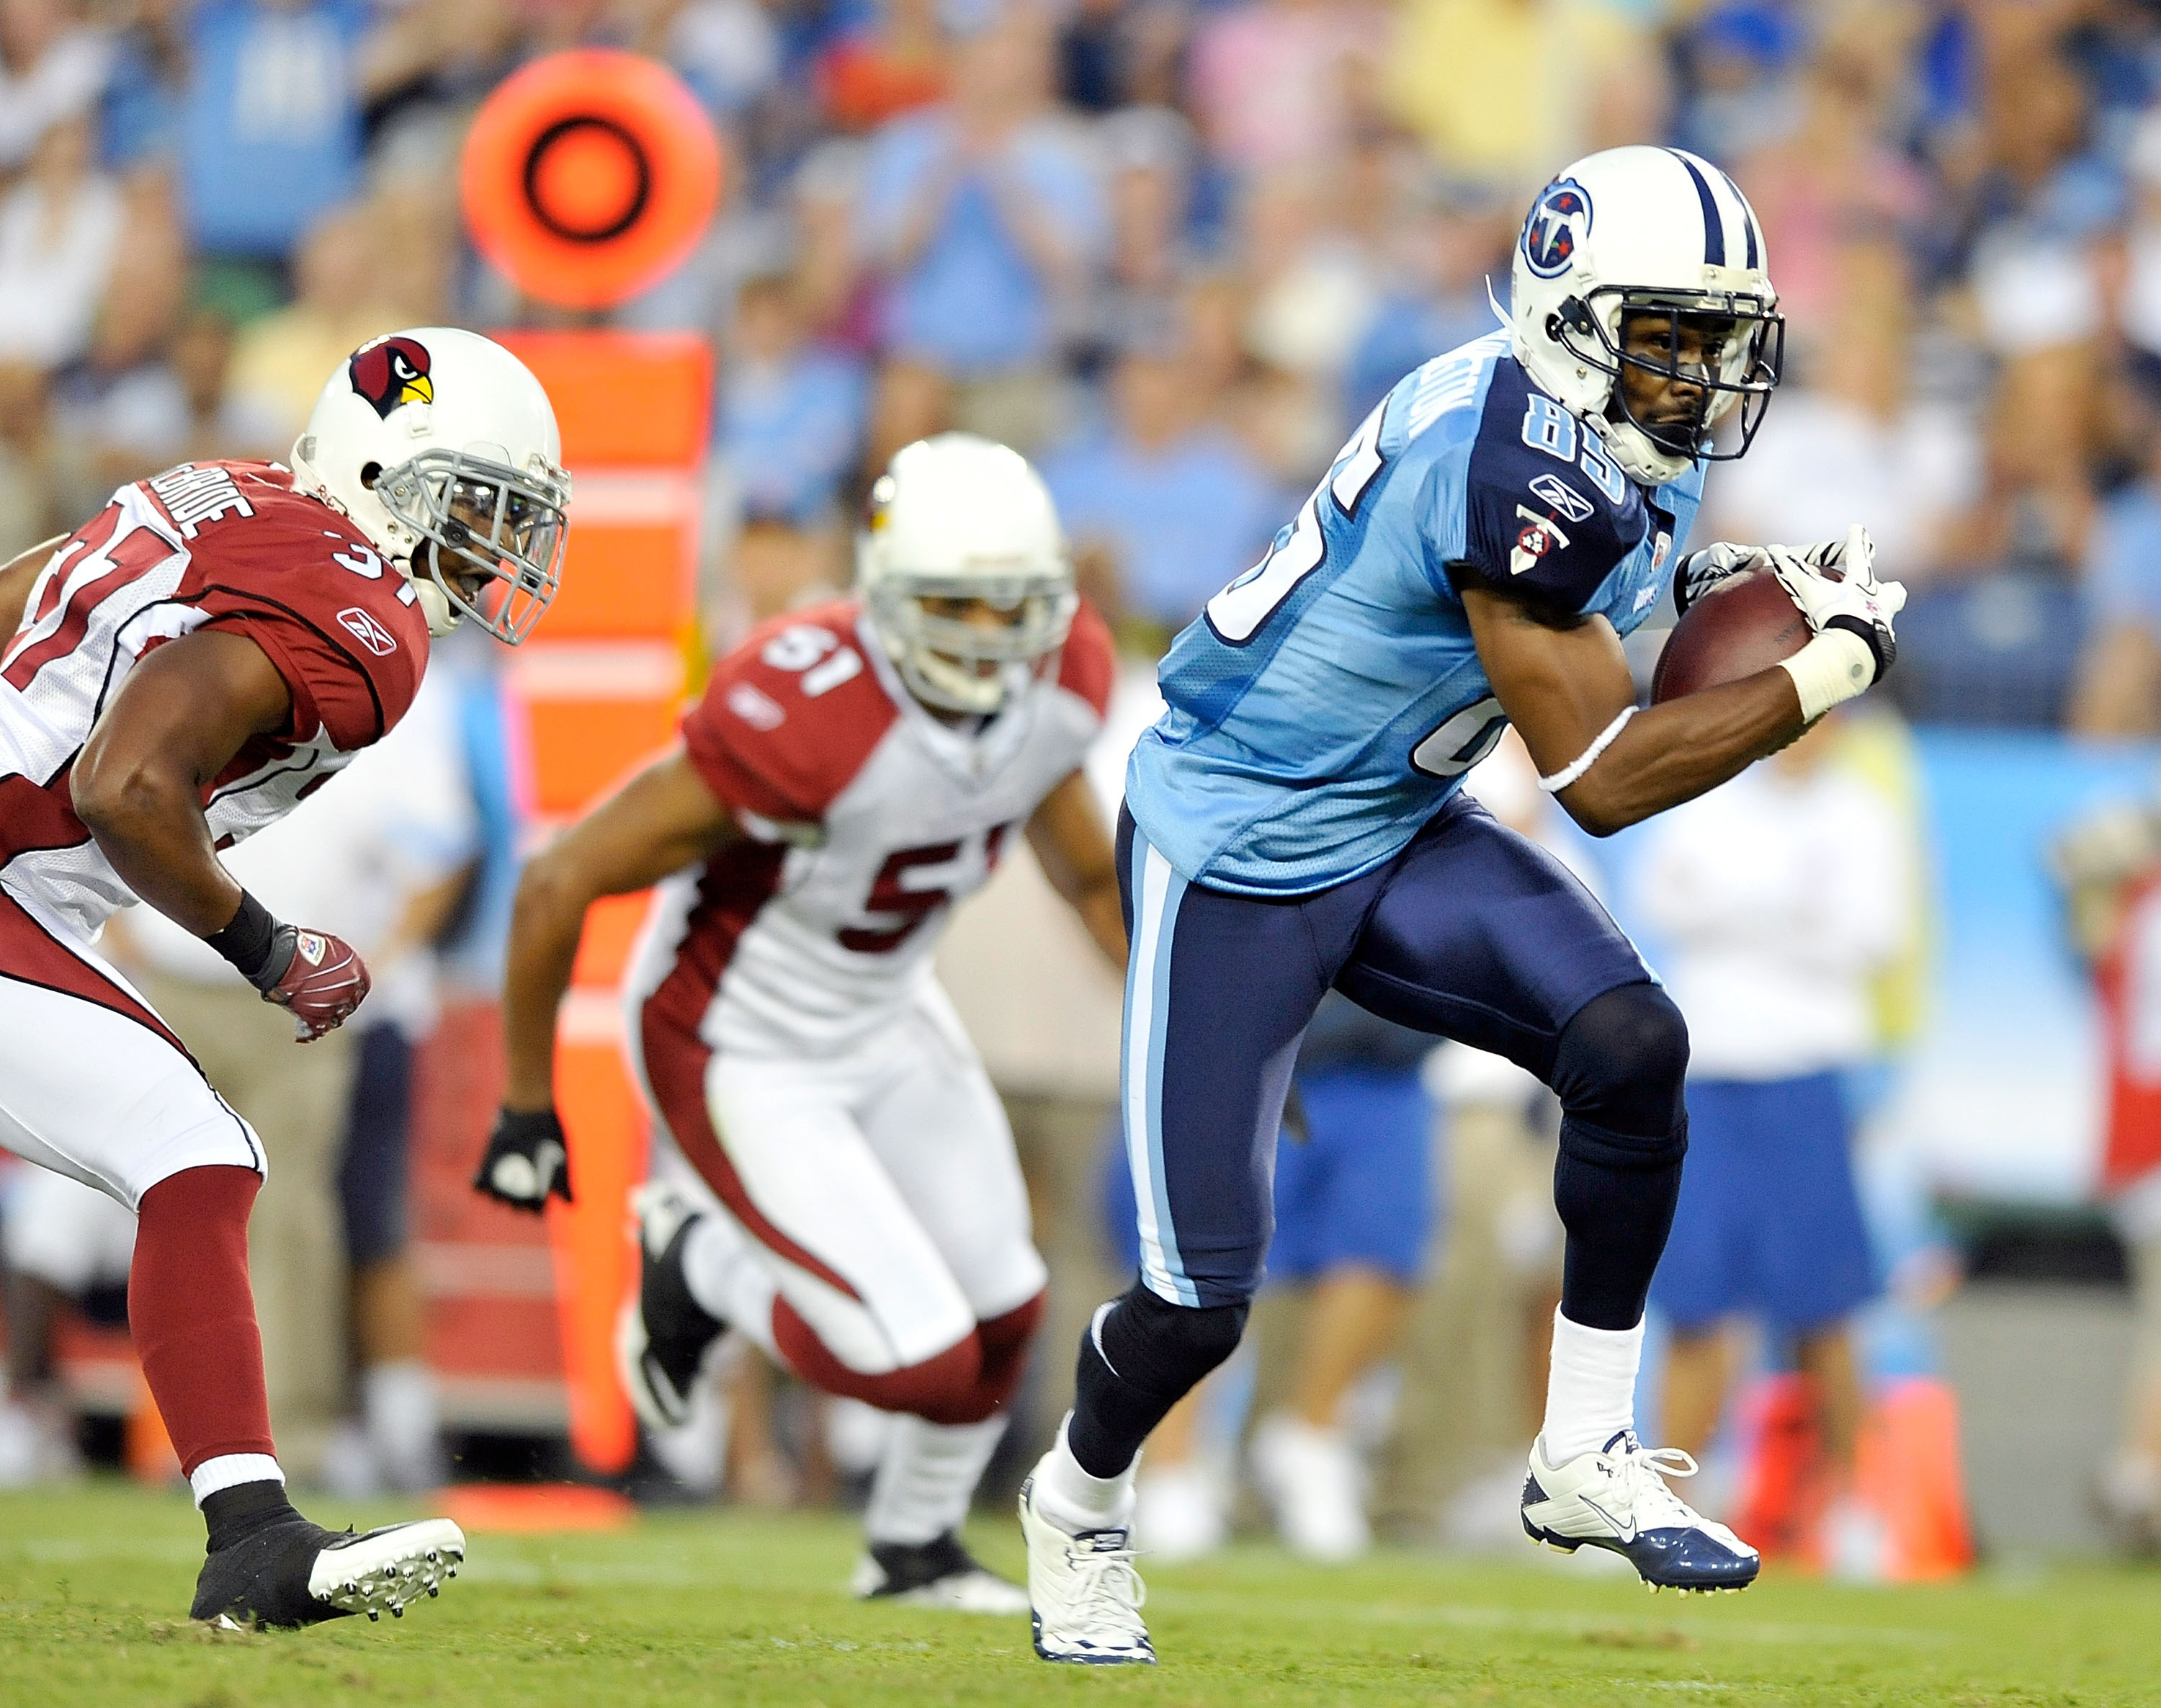 NASHVILLE, TN - AUGUST 23:  Nate Washington #85 of the Tennessee Titans breaks away from the Arizona Cardinals defense after making a first down catch during a preseason game at LP Field on August 23, 2010 in Nashville, Tennessee.  (Photo by Grant Halvers